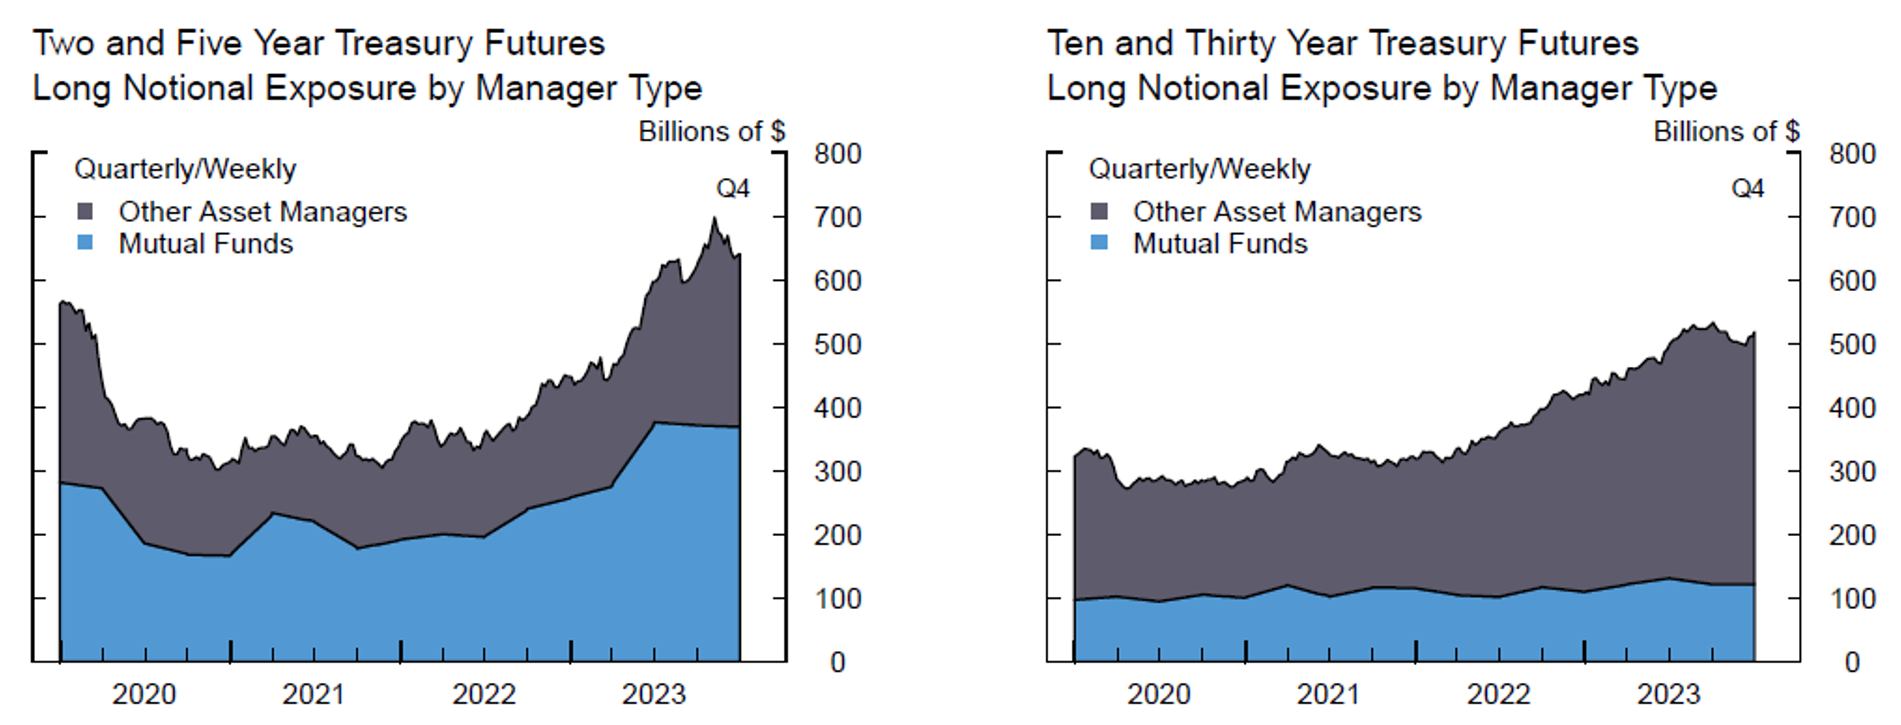 Figure 3. Mutual Funds' Share of Asset Manager Treasury Futures Exposure. See accessible link for data.